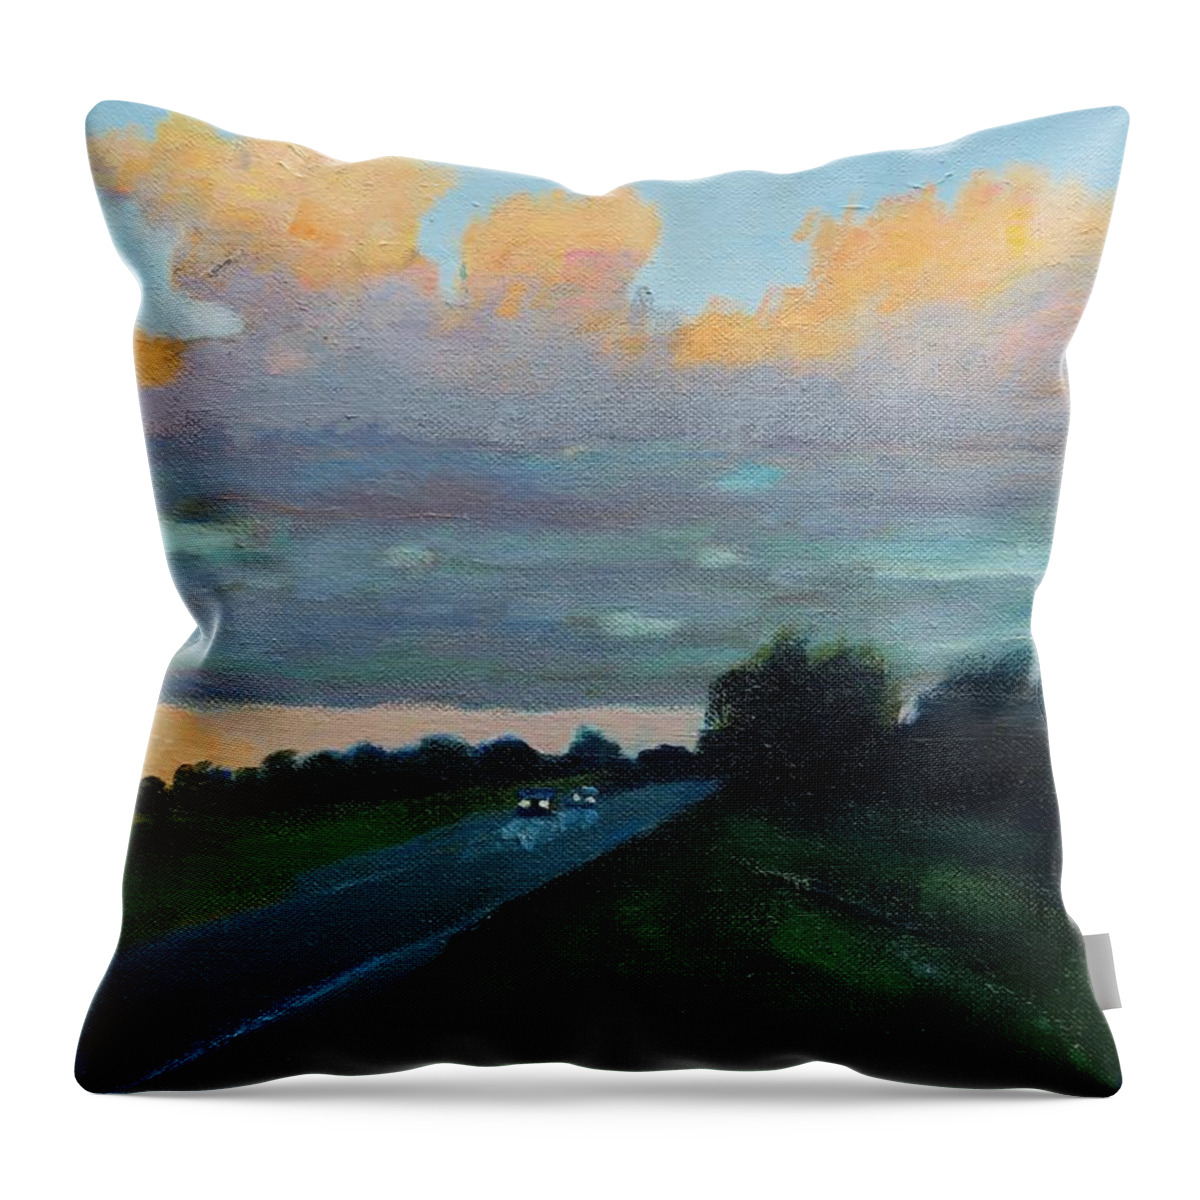 Clouds Throw Pillow featuring the painting Between Showers by Gary Coleman